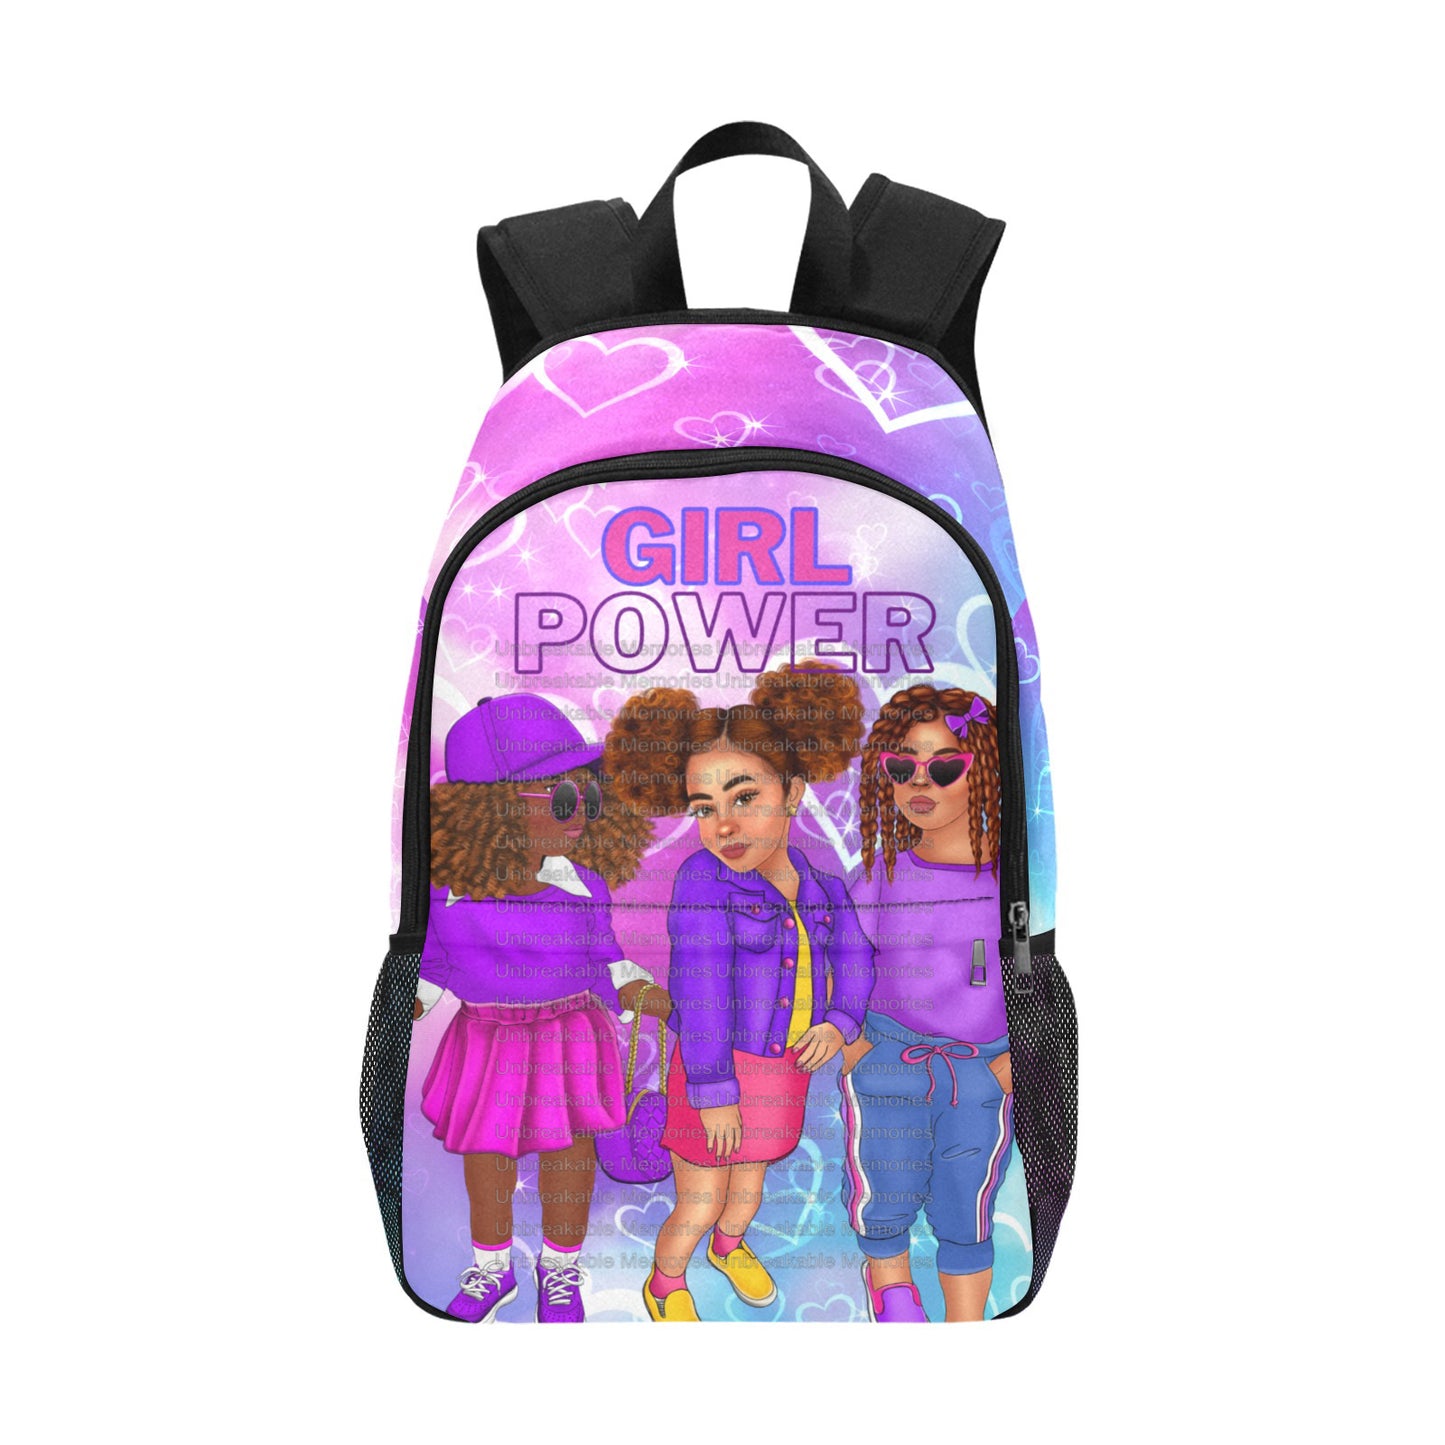 Girl Power Backpack with mesh side pockets